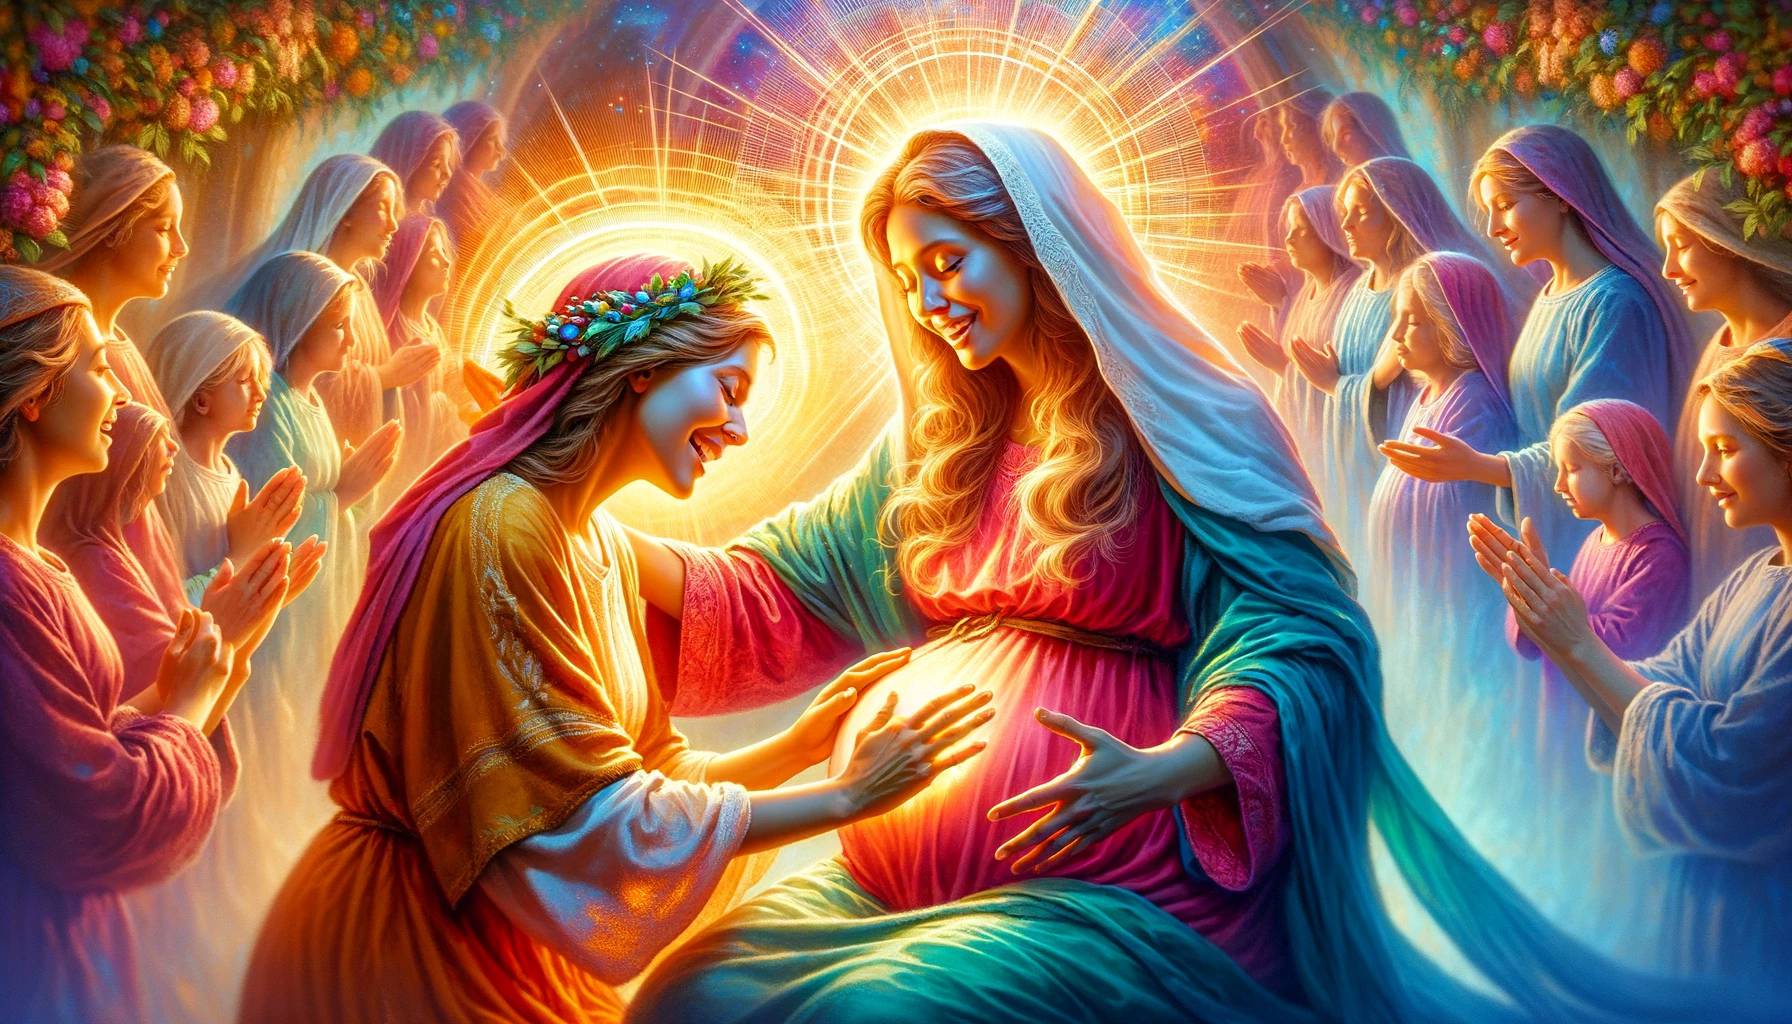 How Was Mary The Mother Of Jesus Related To Elizabeth The Mother Of John The Baptist